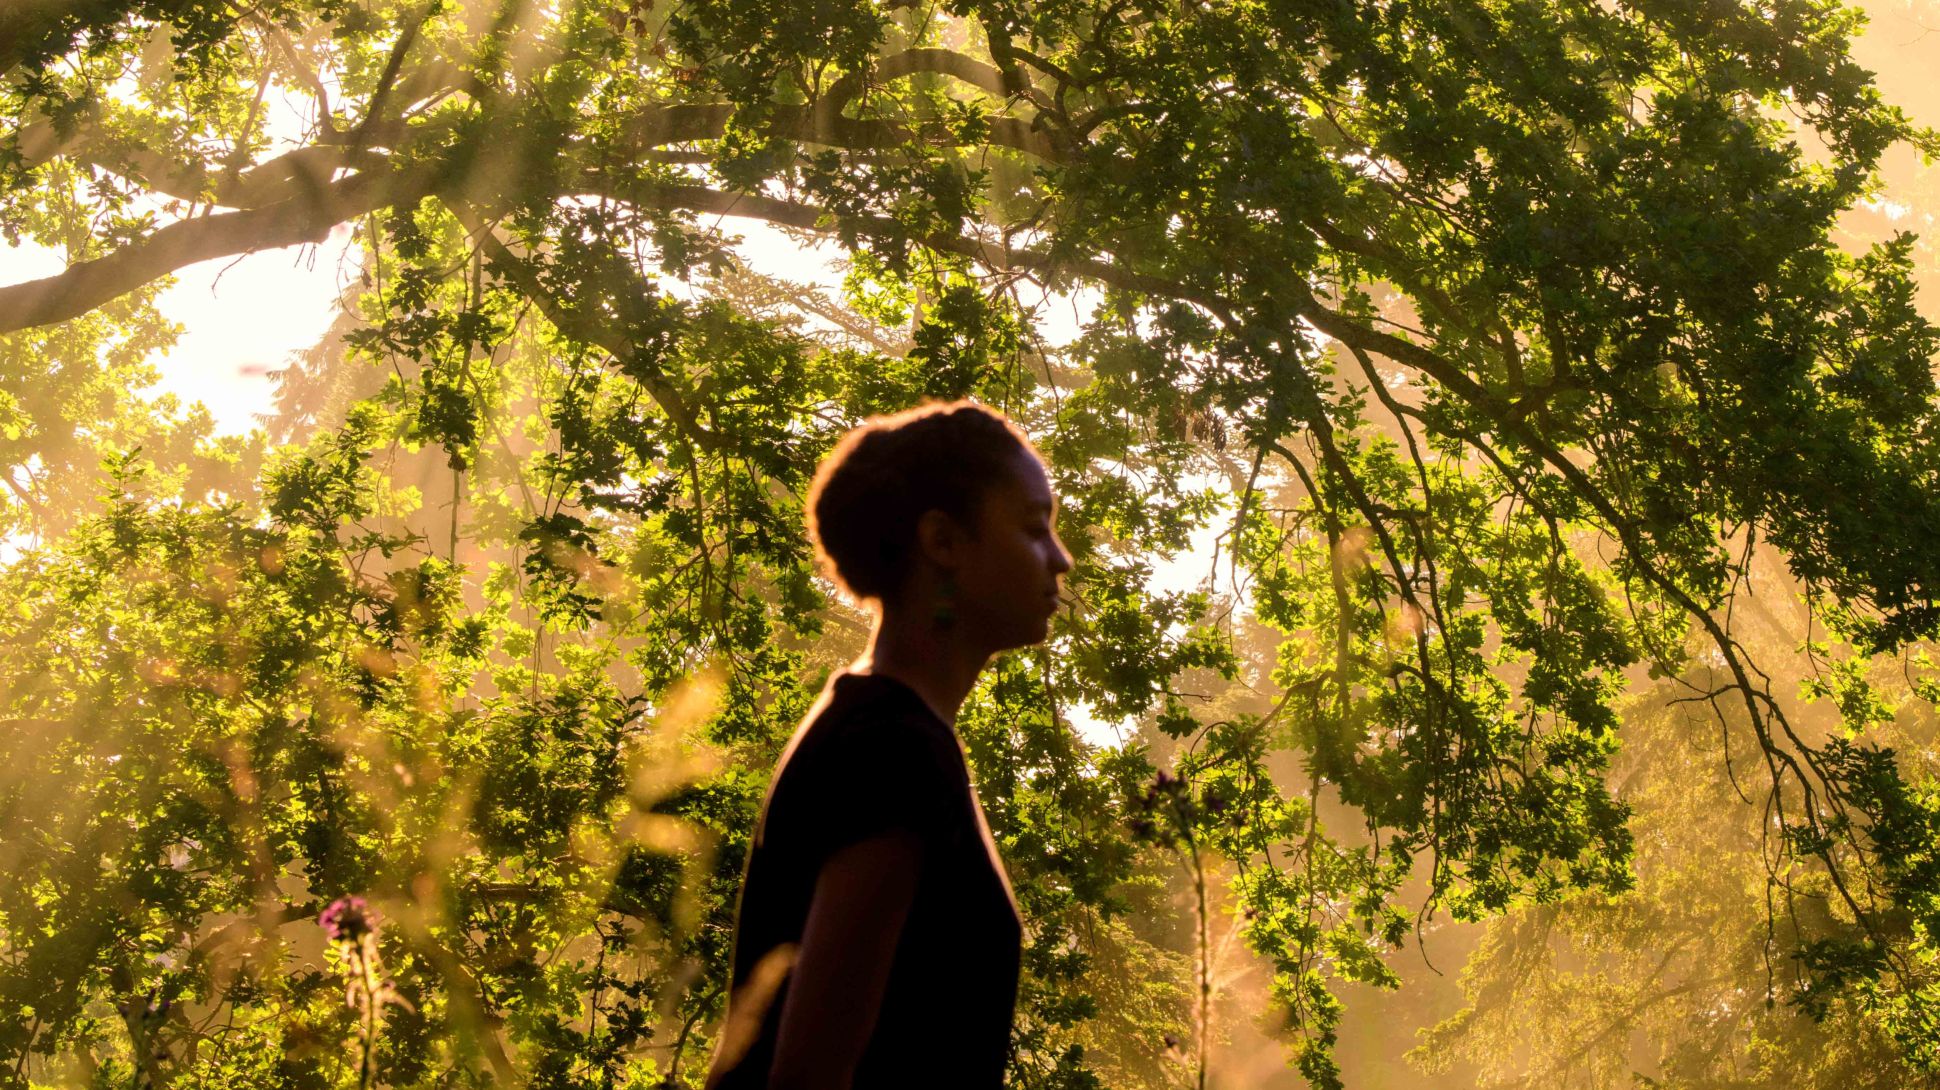 A person silhouetted against the sun shining through trees